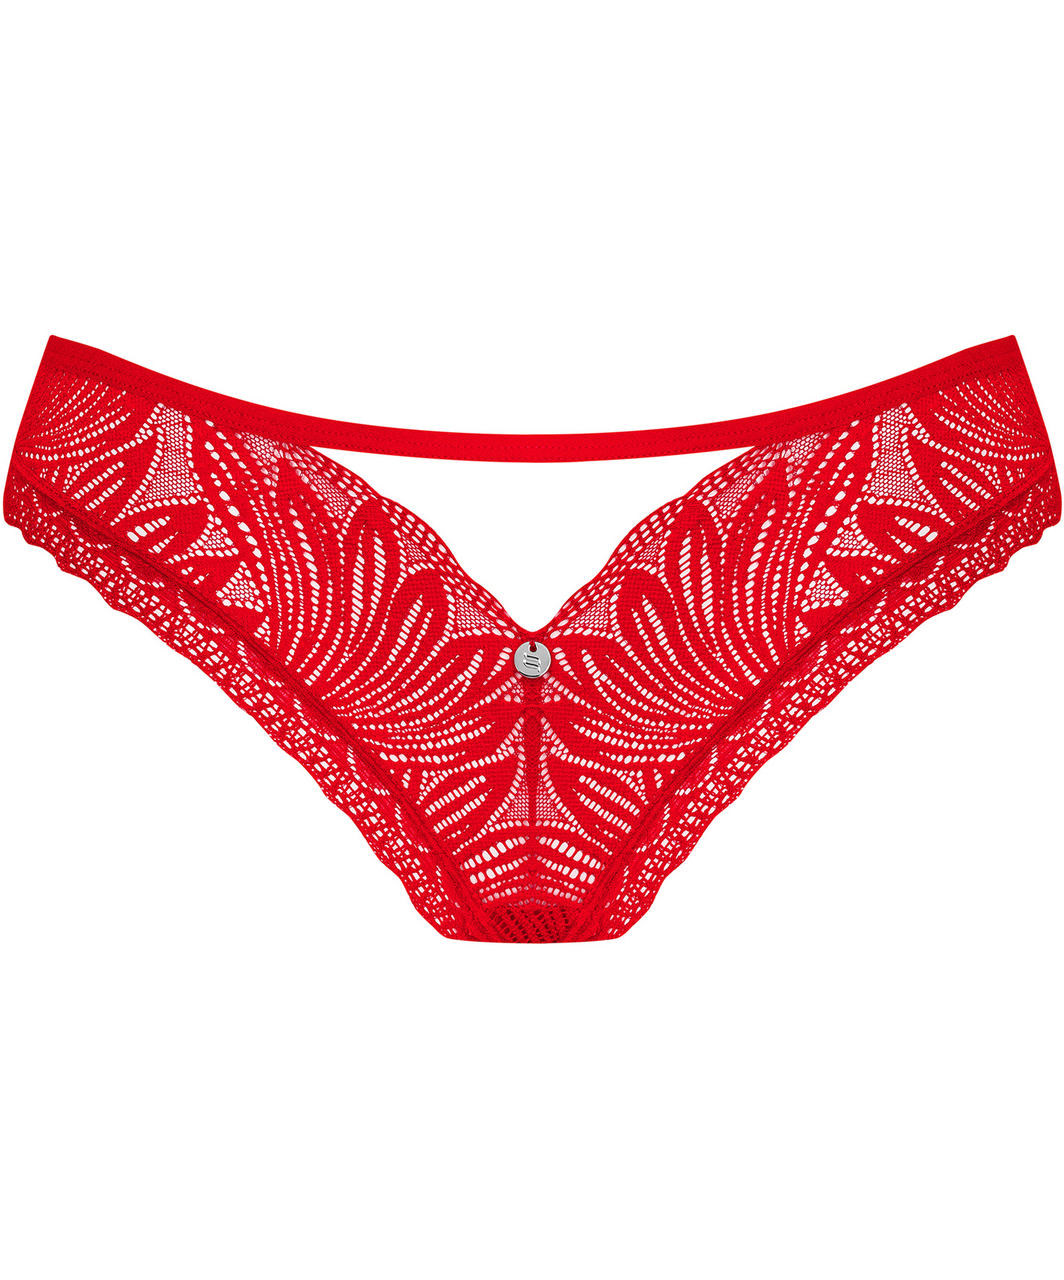 Obsessive Chilisa red lace panties